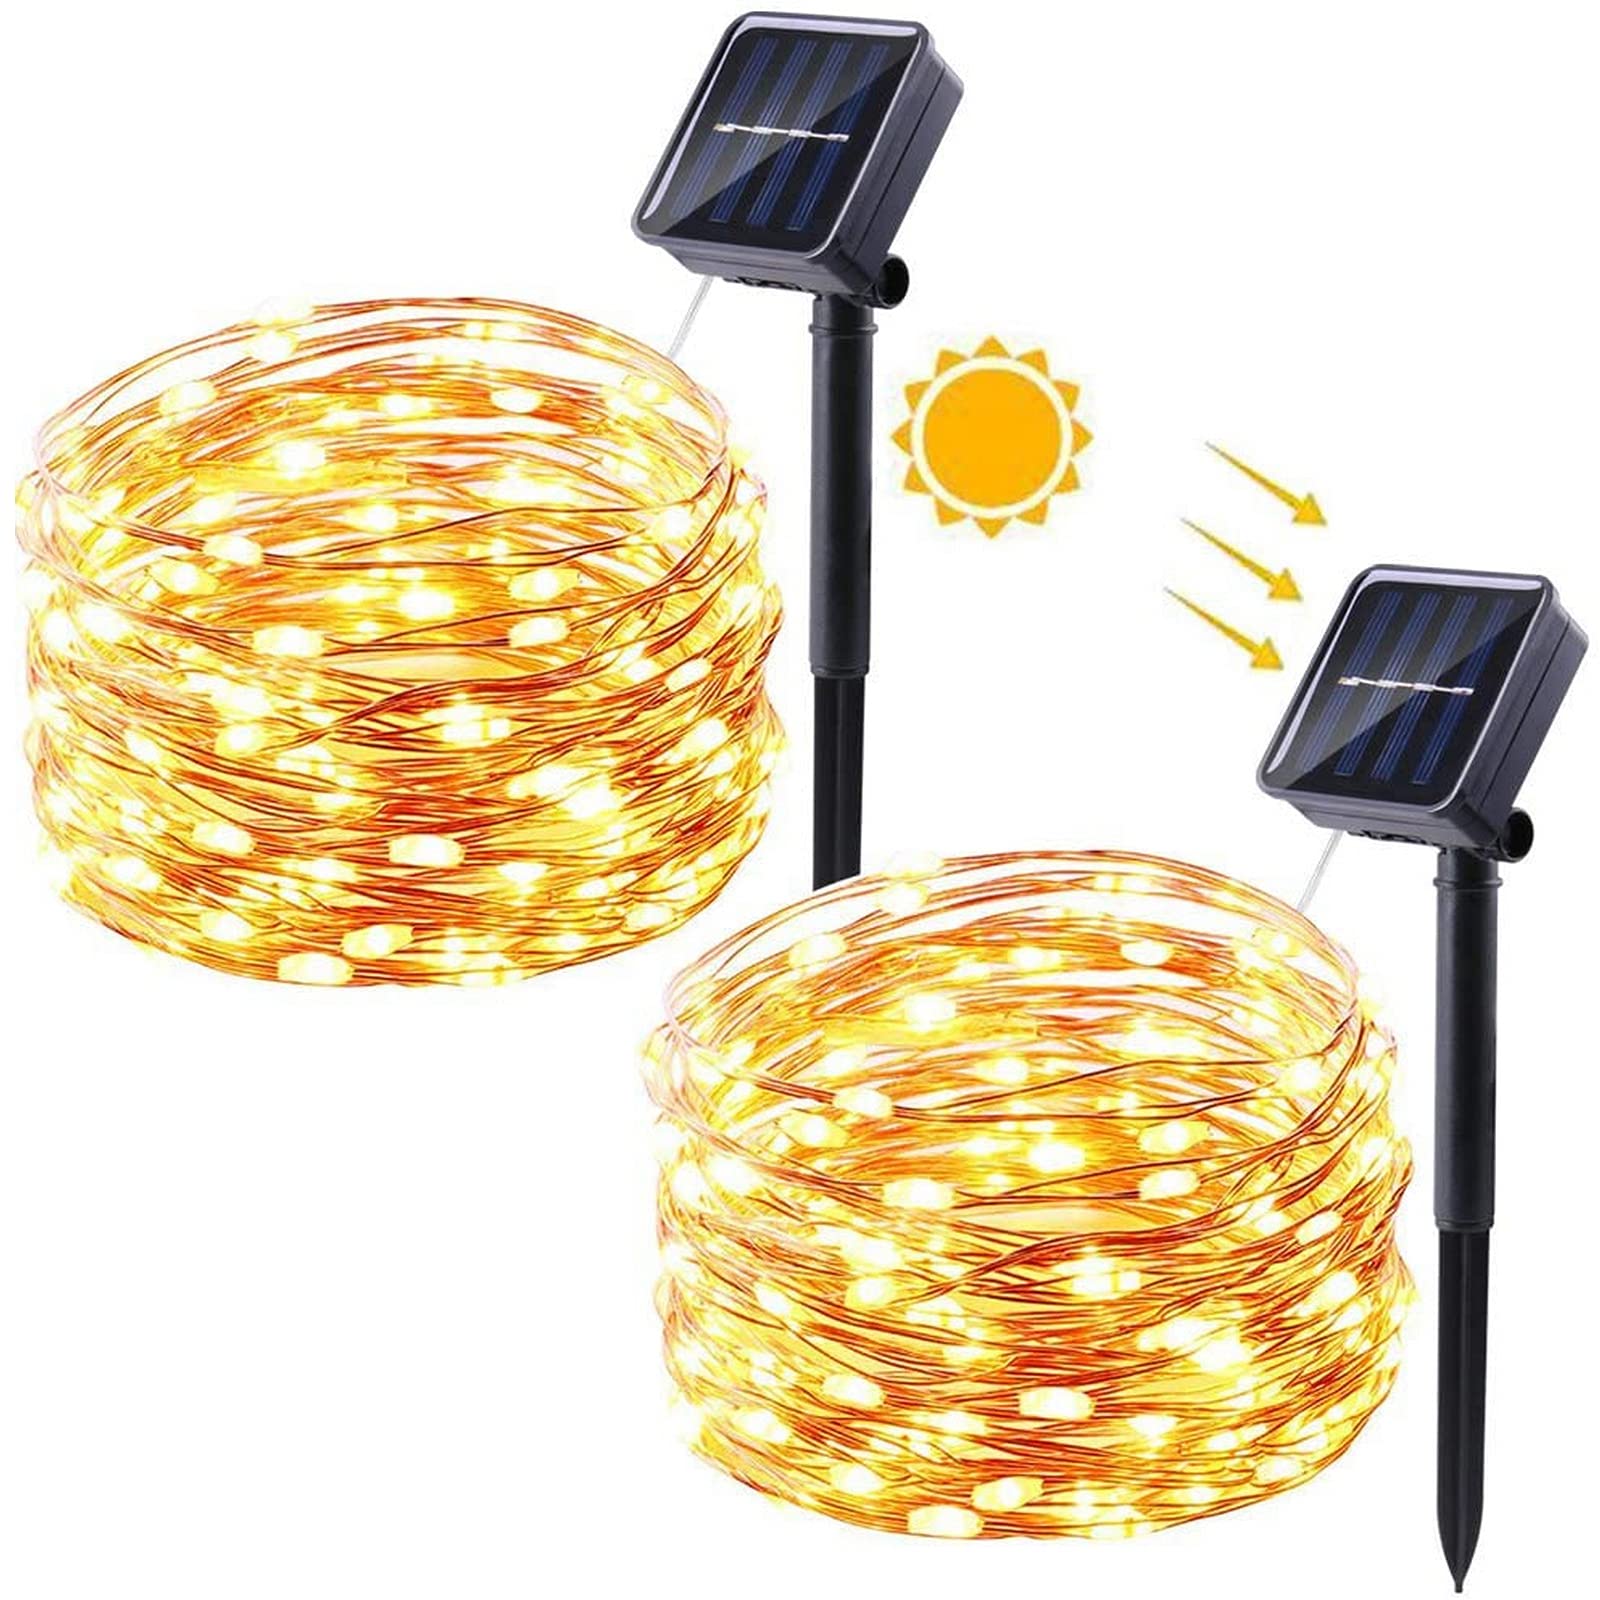 [2 Pack] Solar Fairy Lights Outdoor, Moxled 12M 120 LED Solar Garden Lights Waterproof Copper Wire 8 Modes Decorative Solar String Lights for Patio, Yard, Wedding, Party (Warm White)